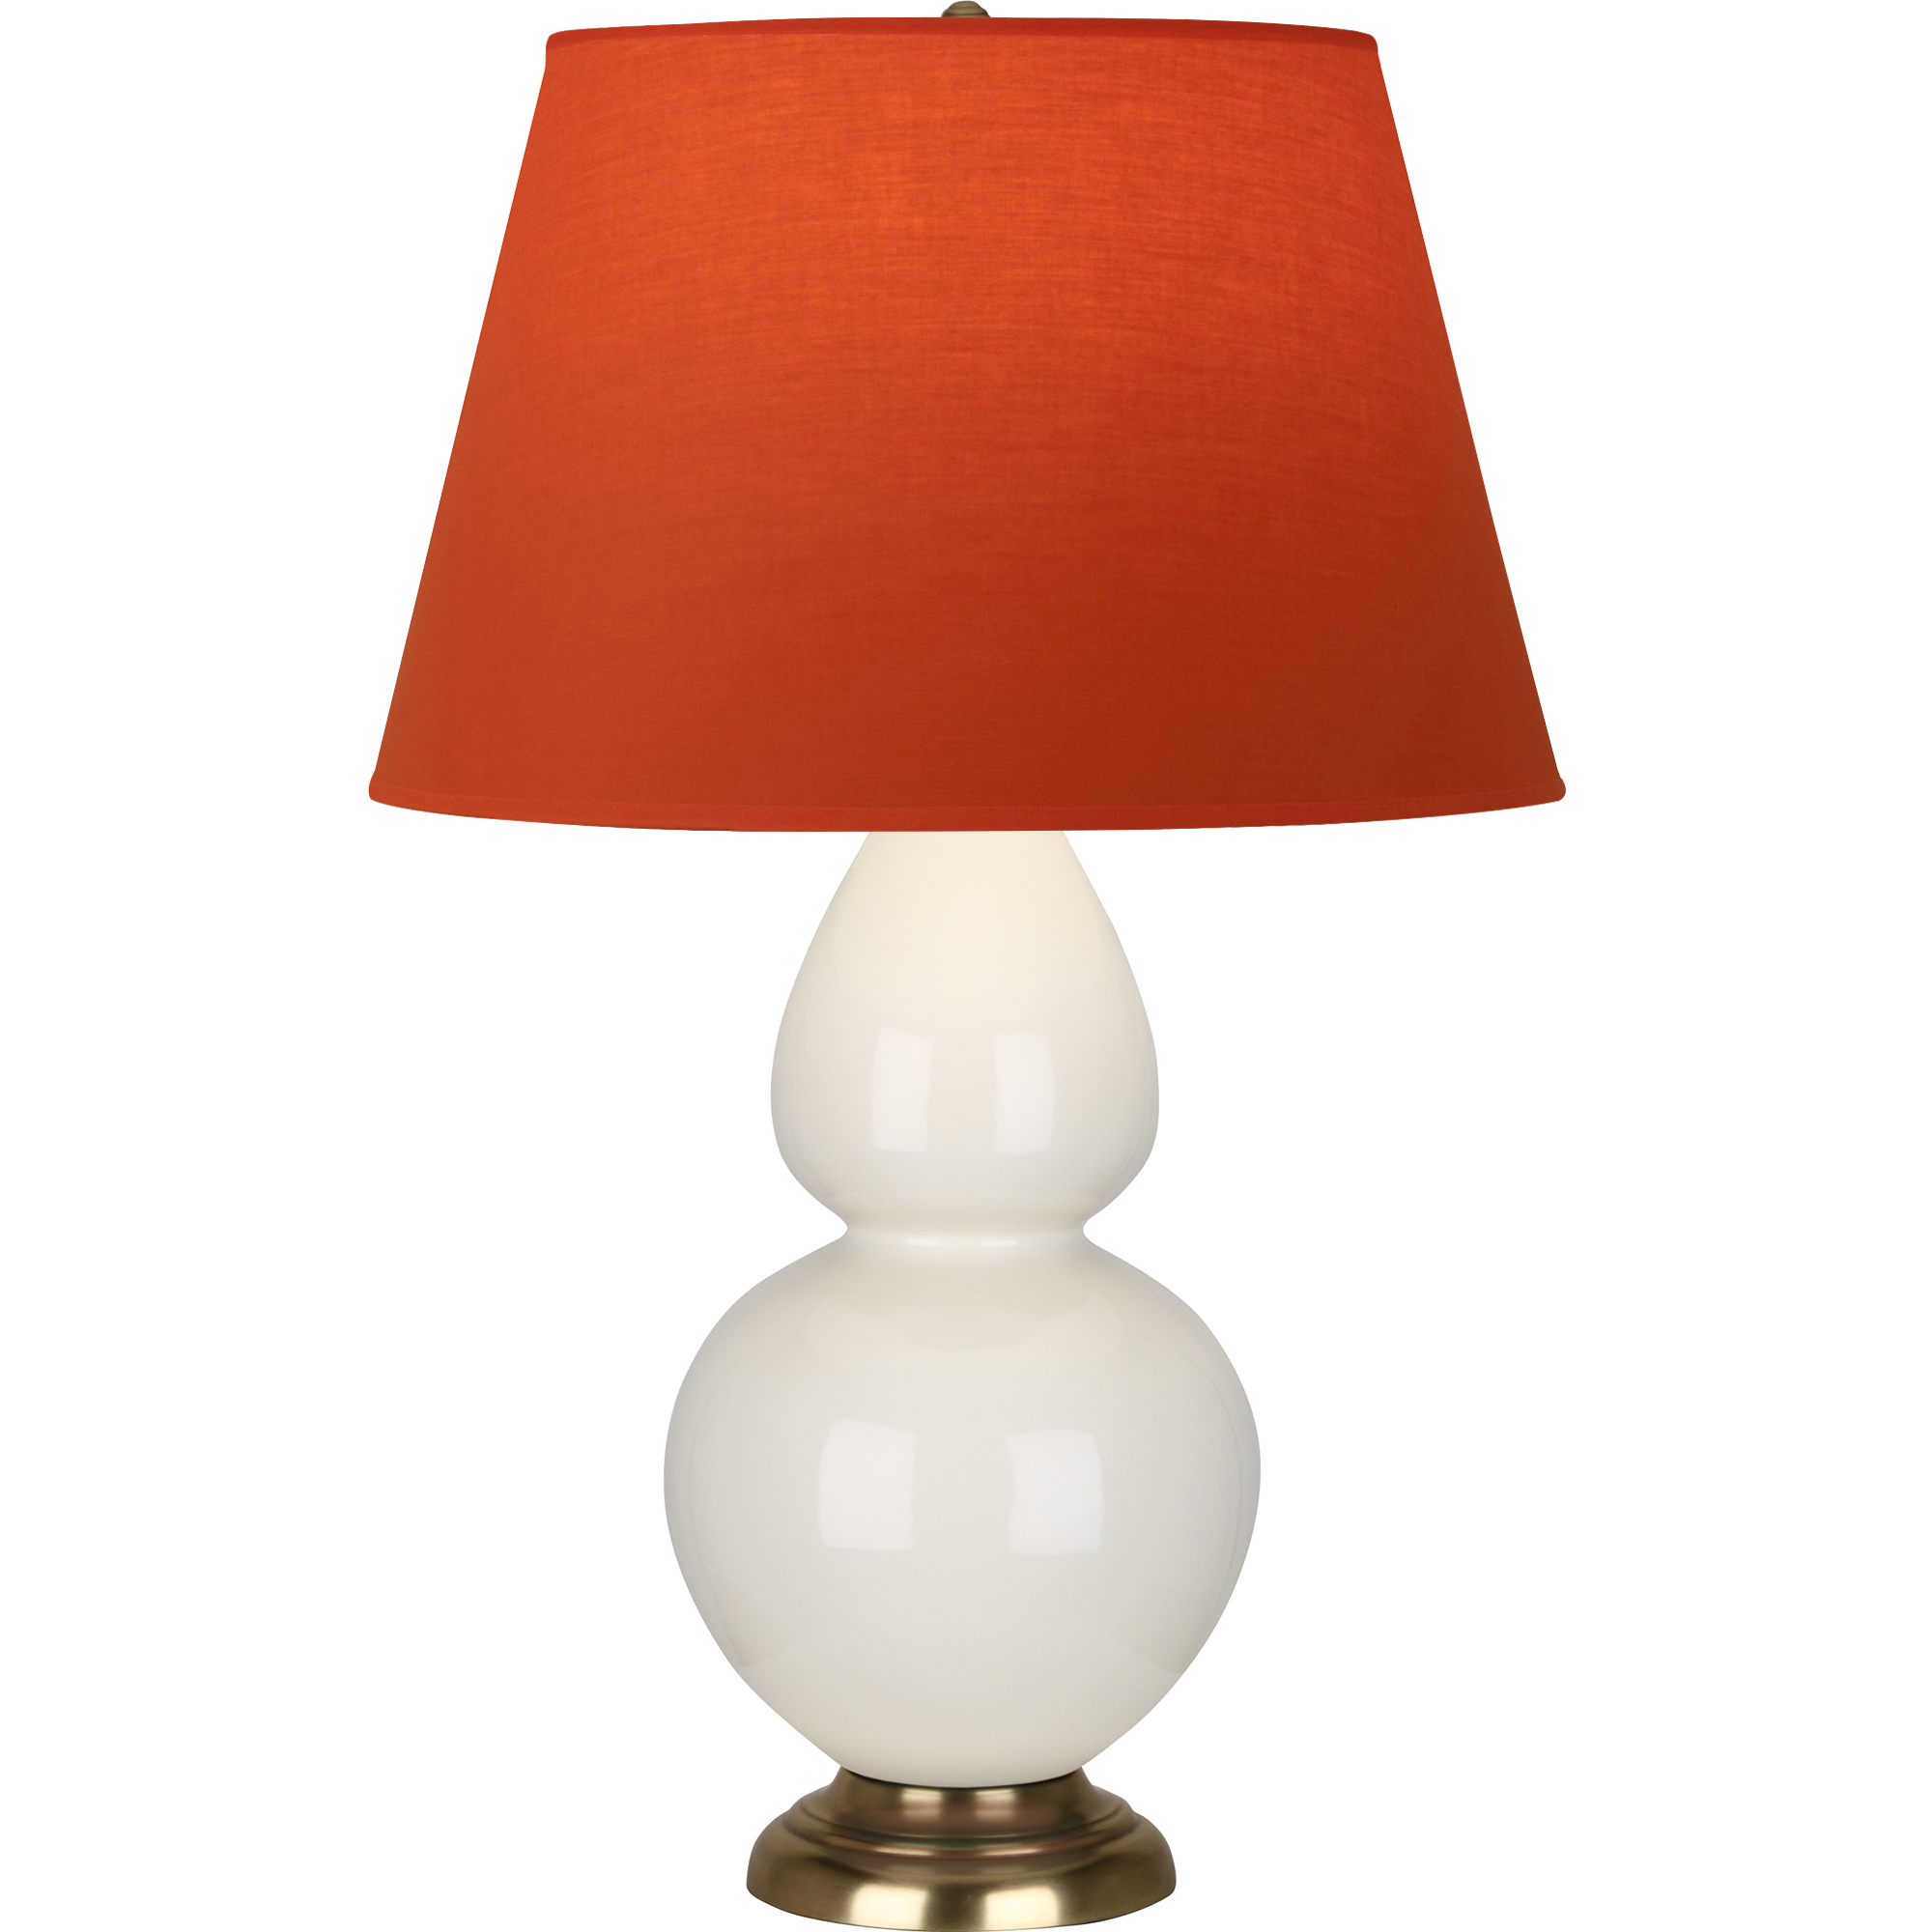 Double Gourd Table Lamp Style #1754T